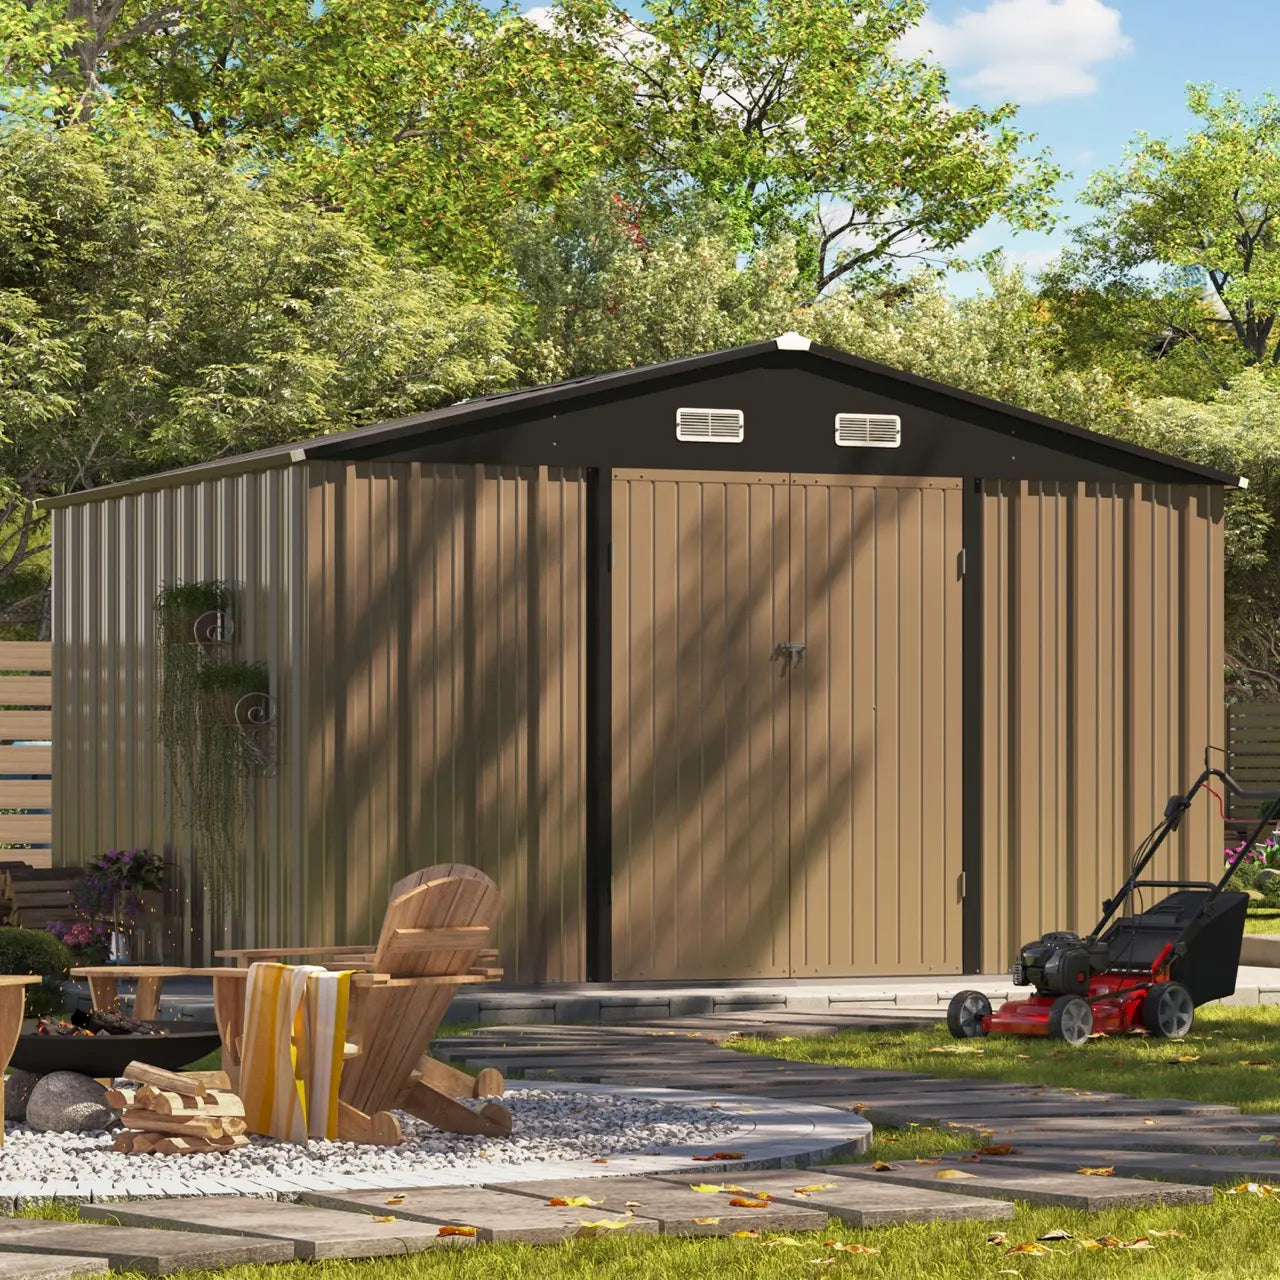 Patiowell 10x8 Metal Shed Pro With An Optional Floor Base